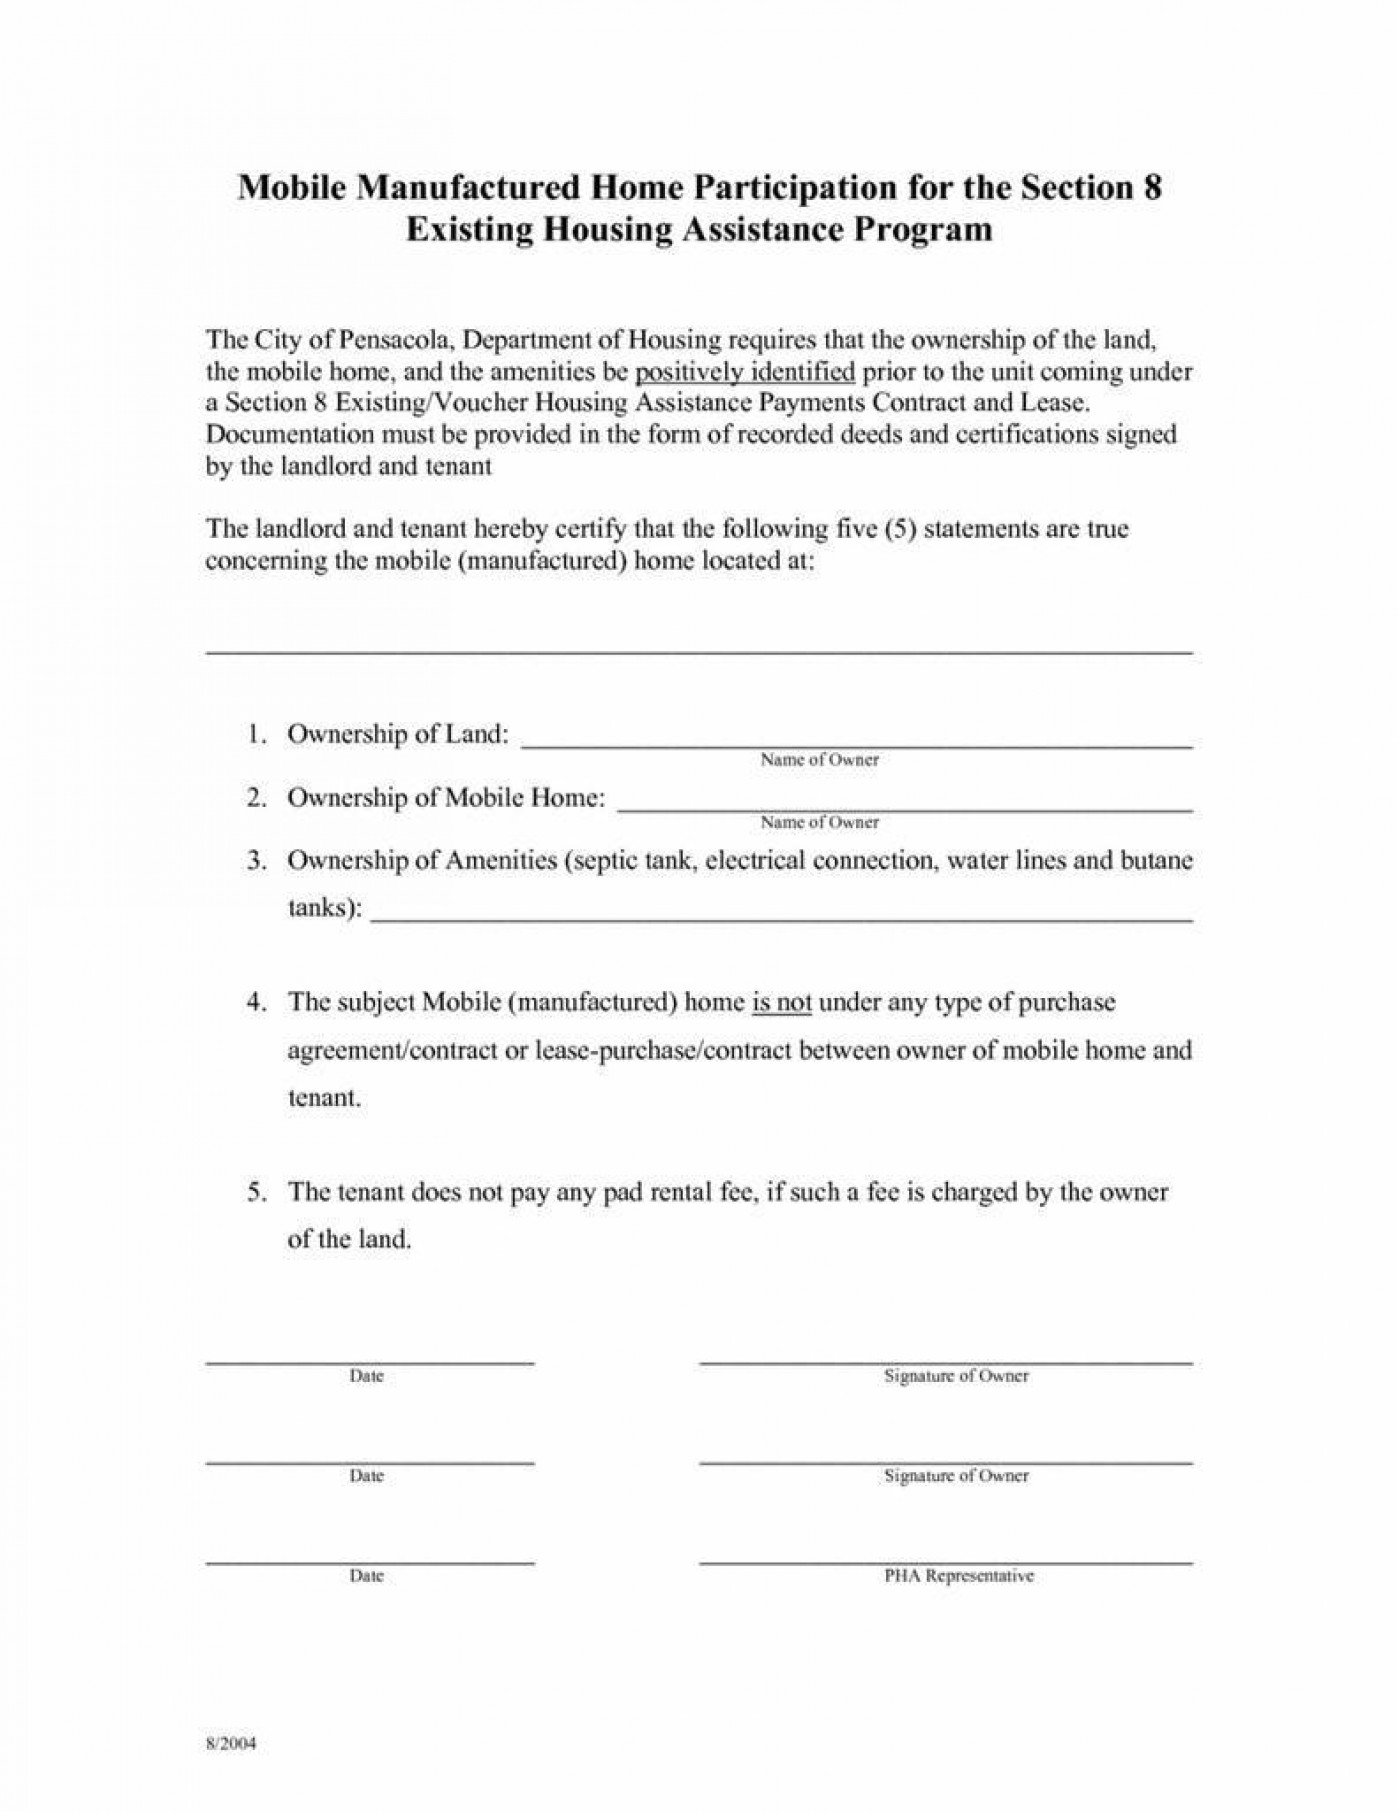 Purchase Agreement Mn 015 Home Purchase Agreement Template Ideas Free Memo Templates Image